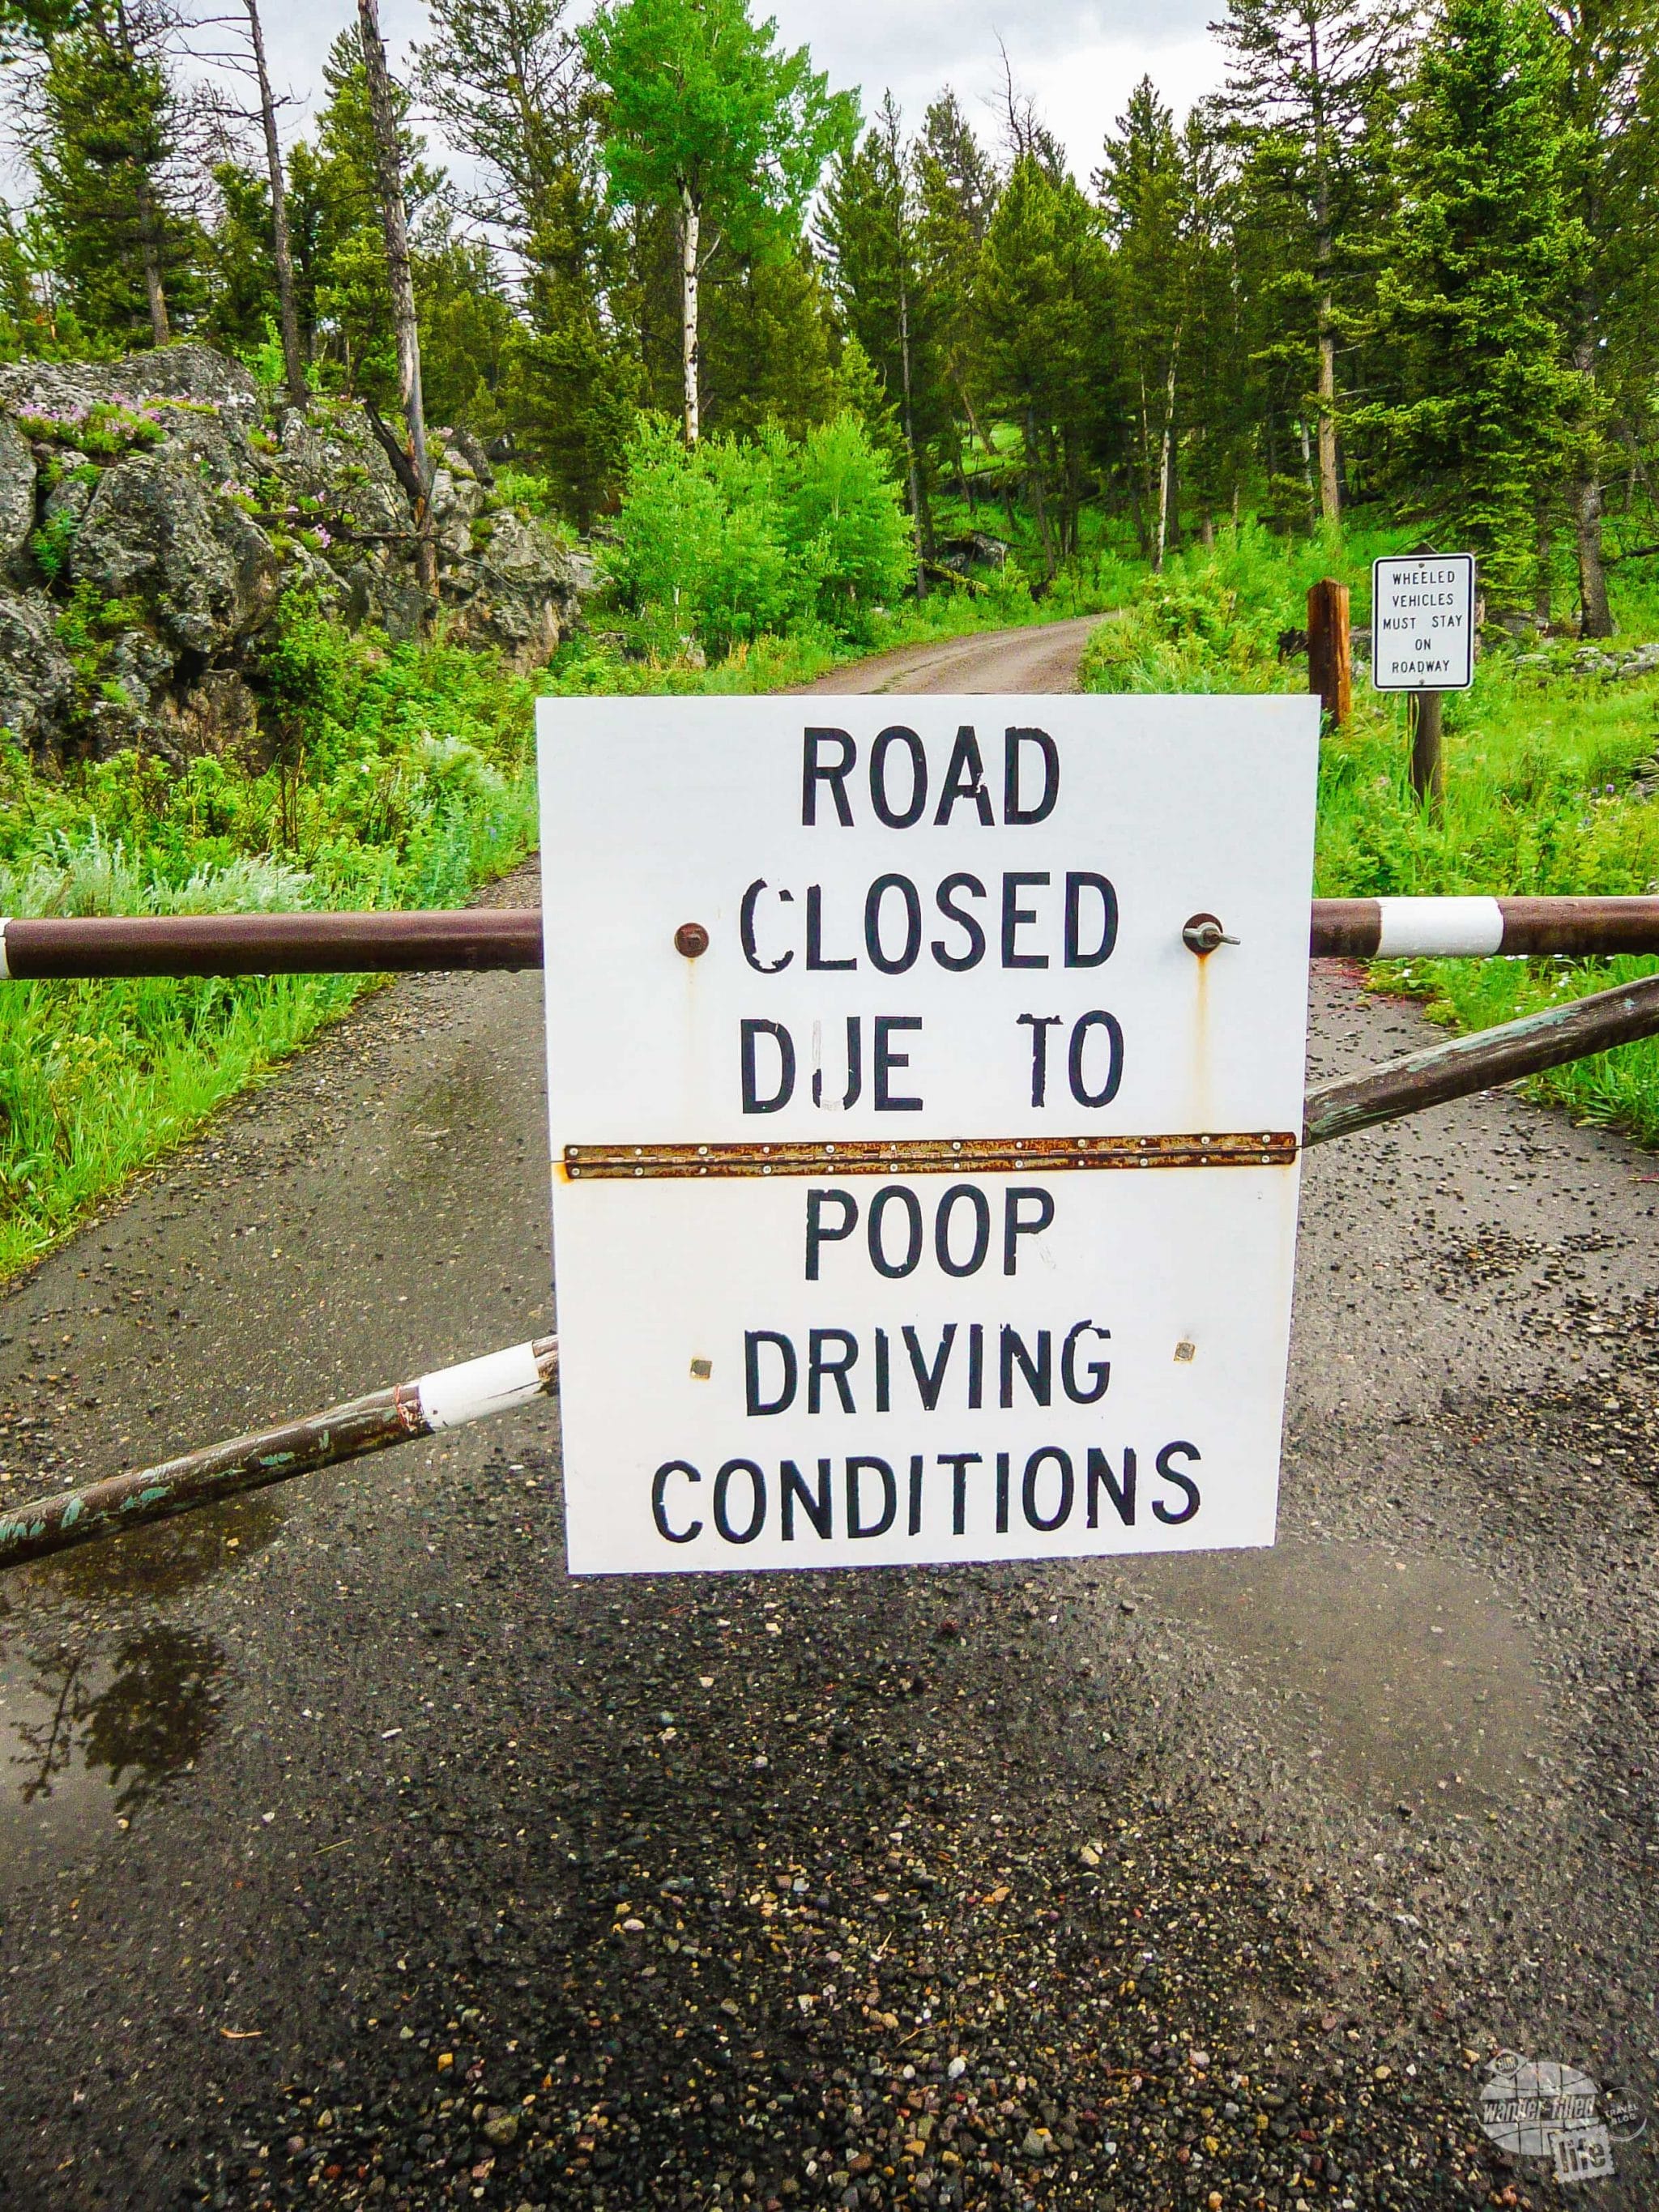 Road closed sign in Yellowstone National Park